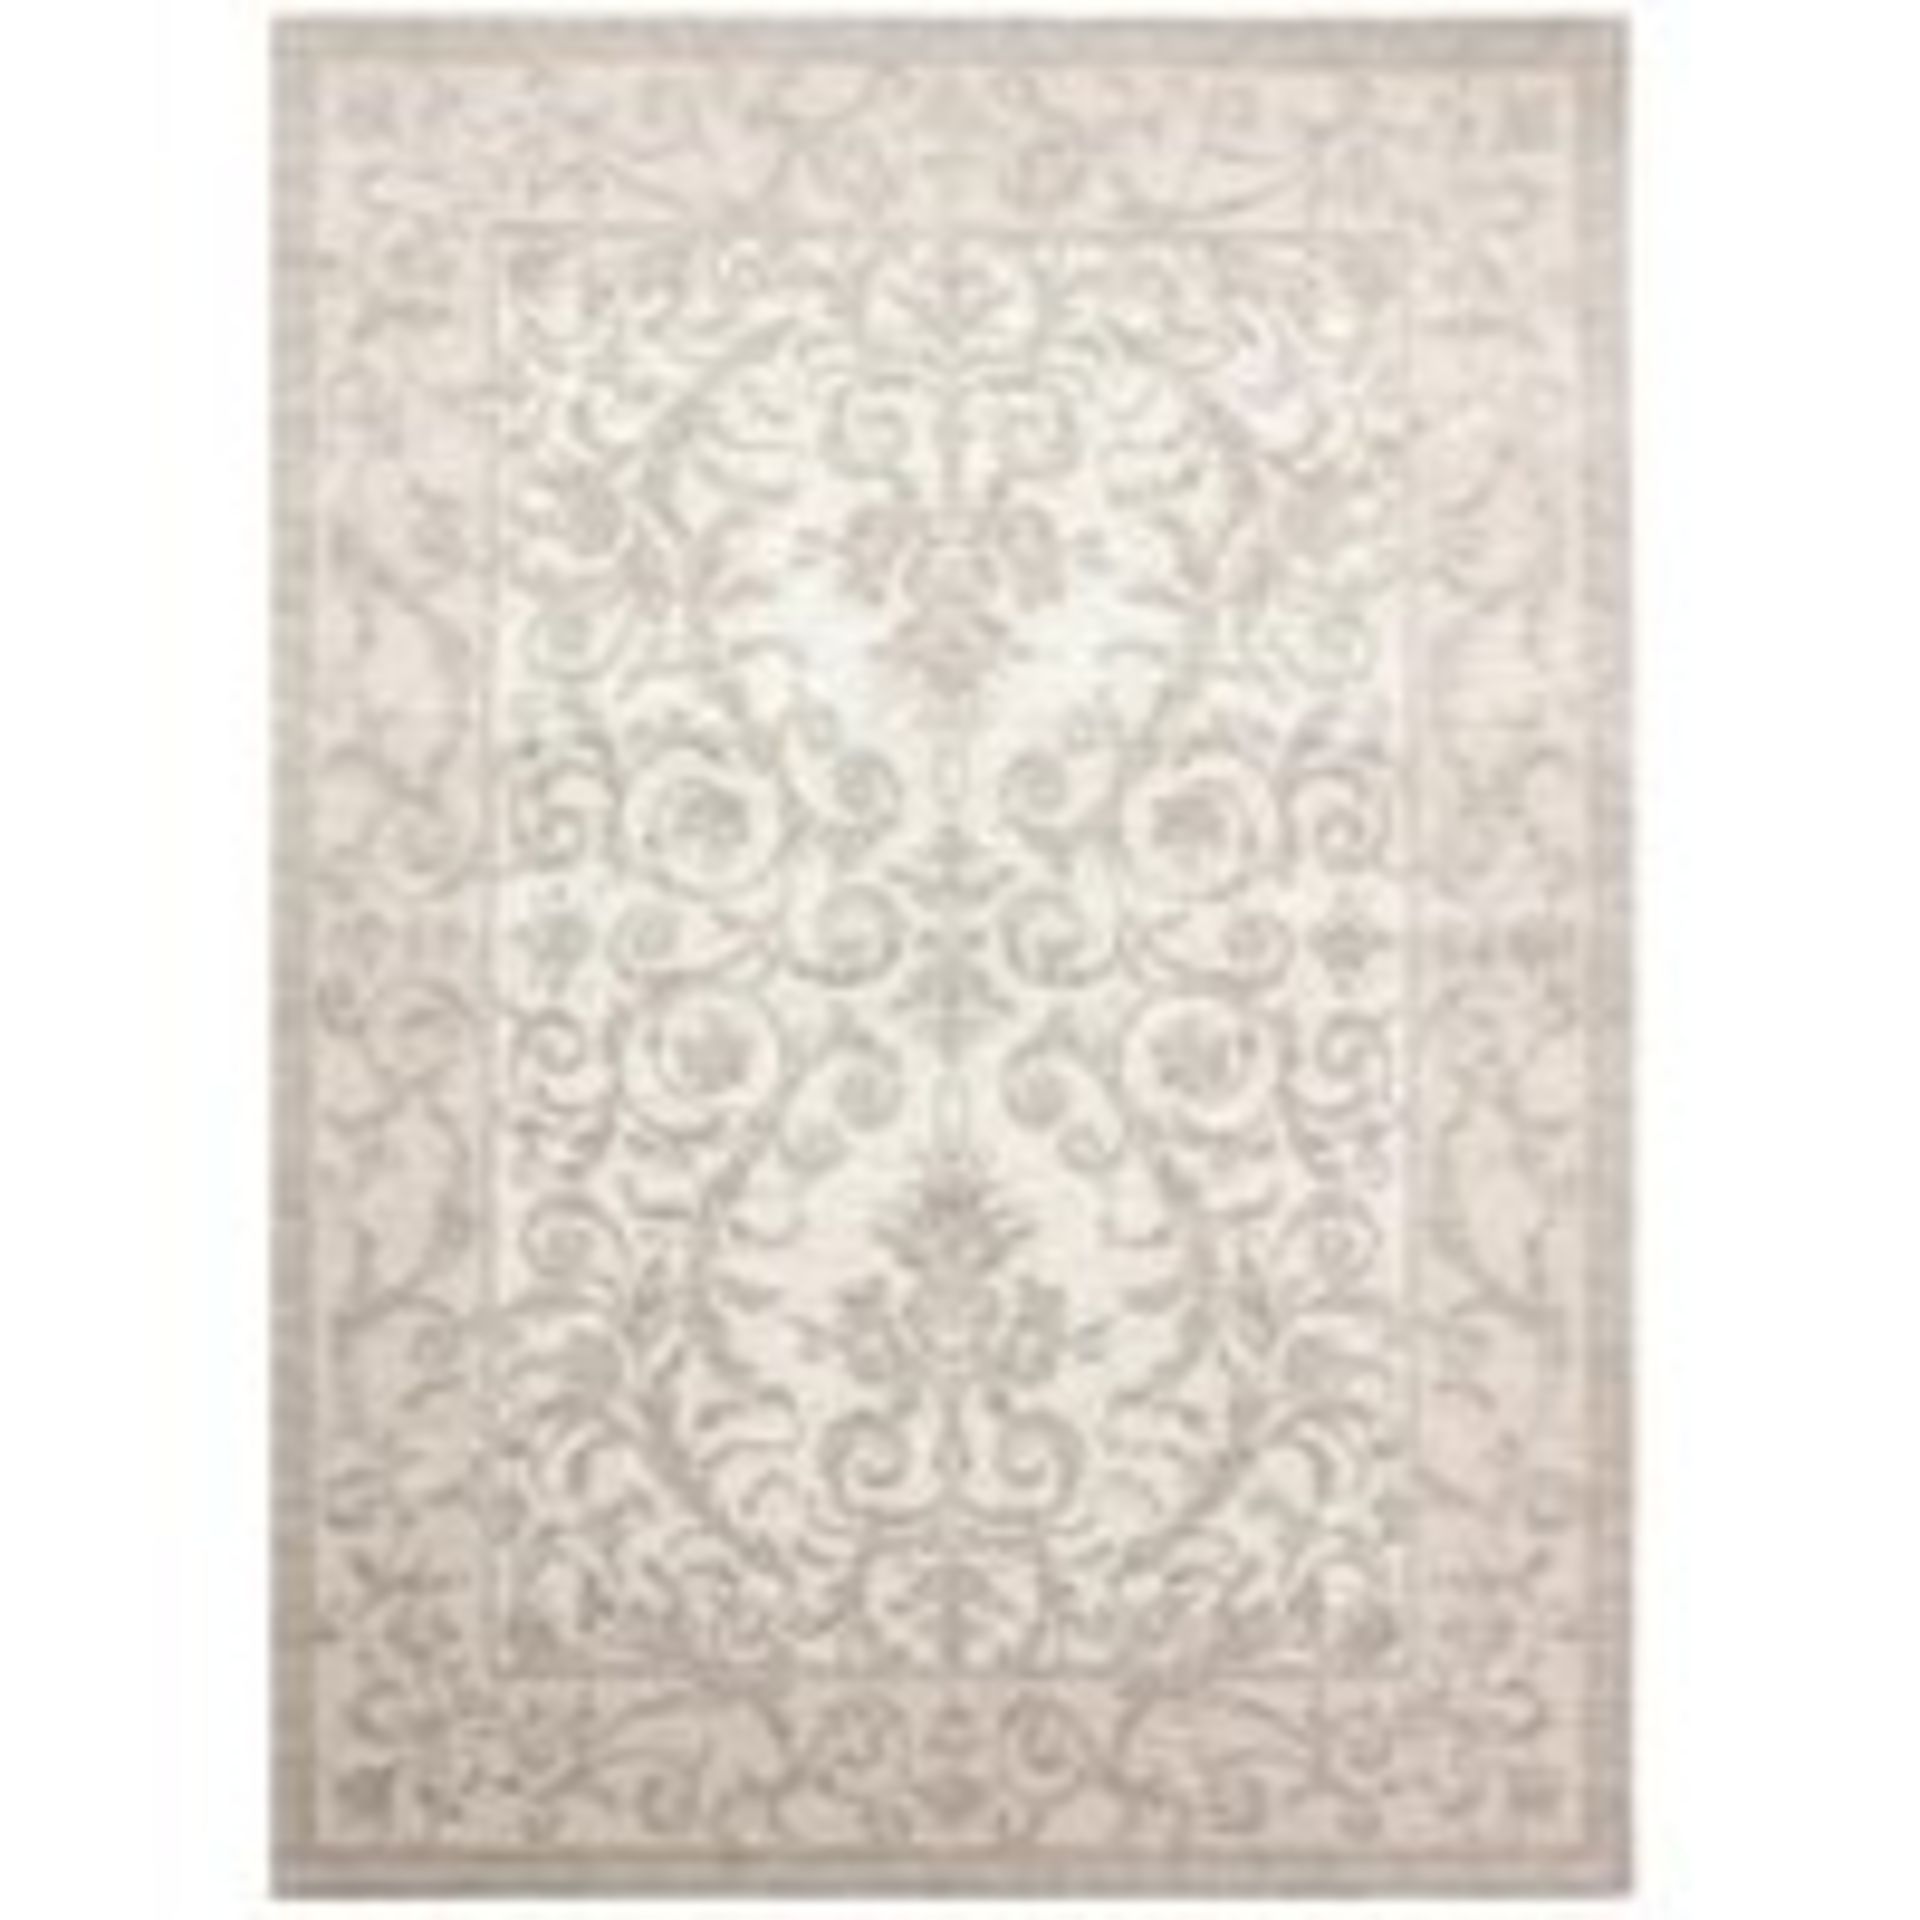 Dorma Regency Chnill Dorma Chenille D040 Natural Rectangle Rug 200X290cm RRP 449.00 About the - Image 2 of 2